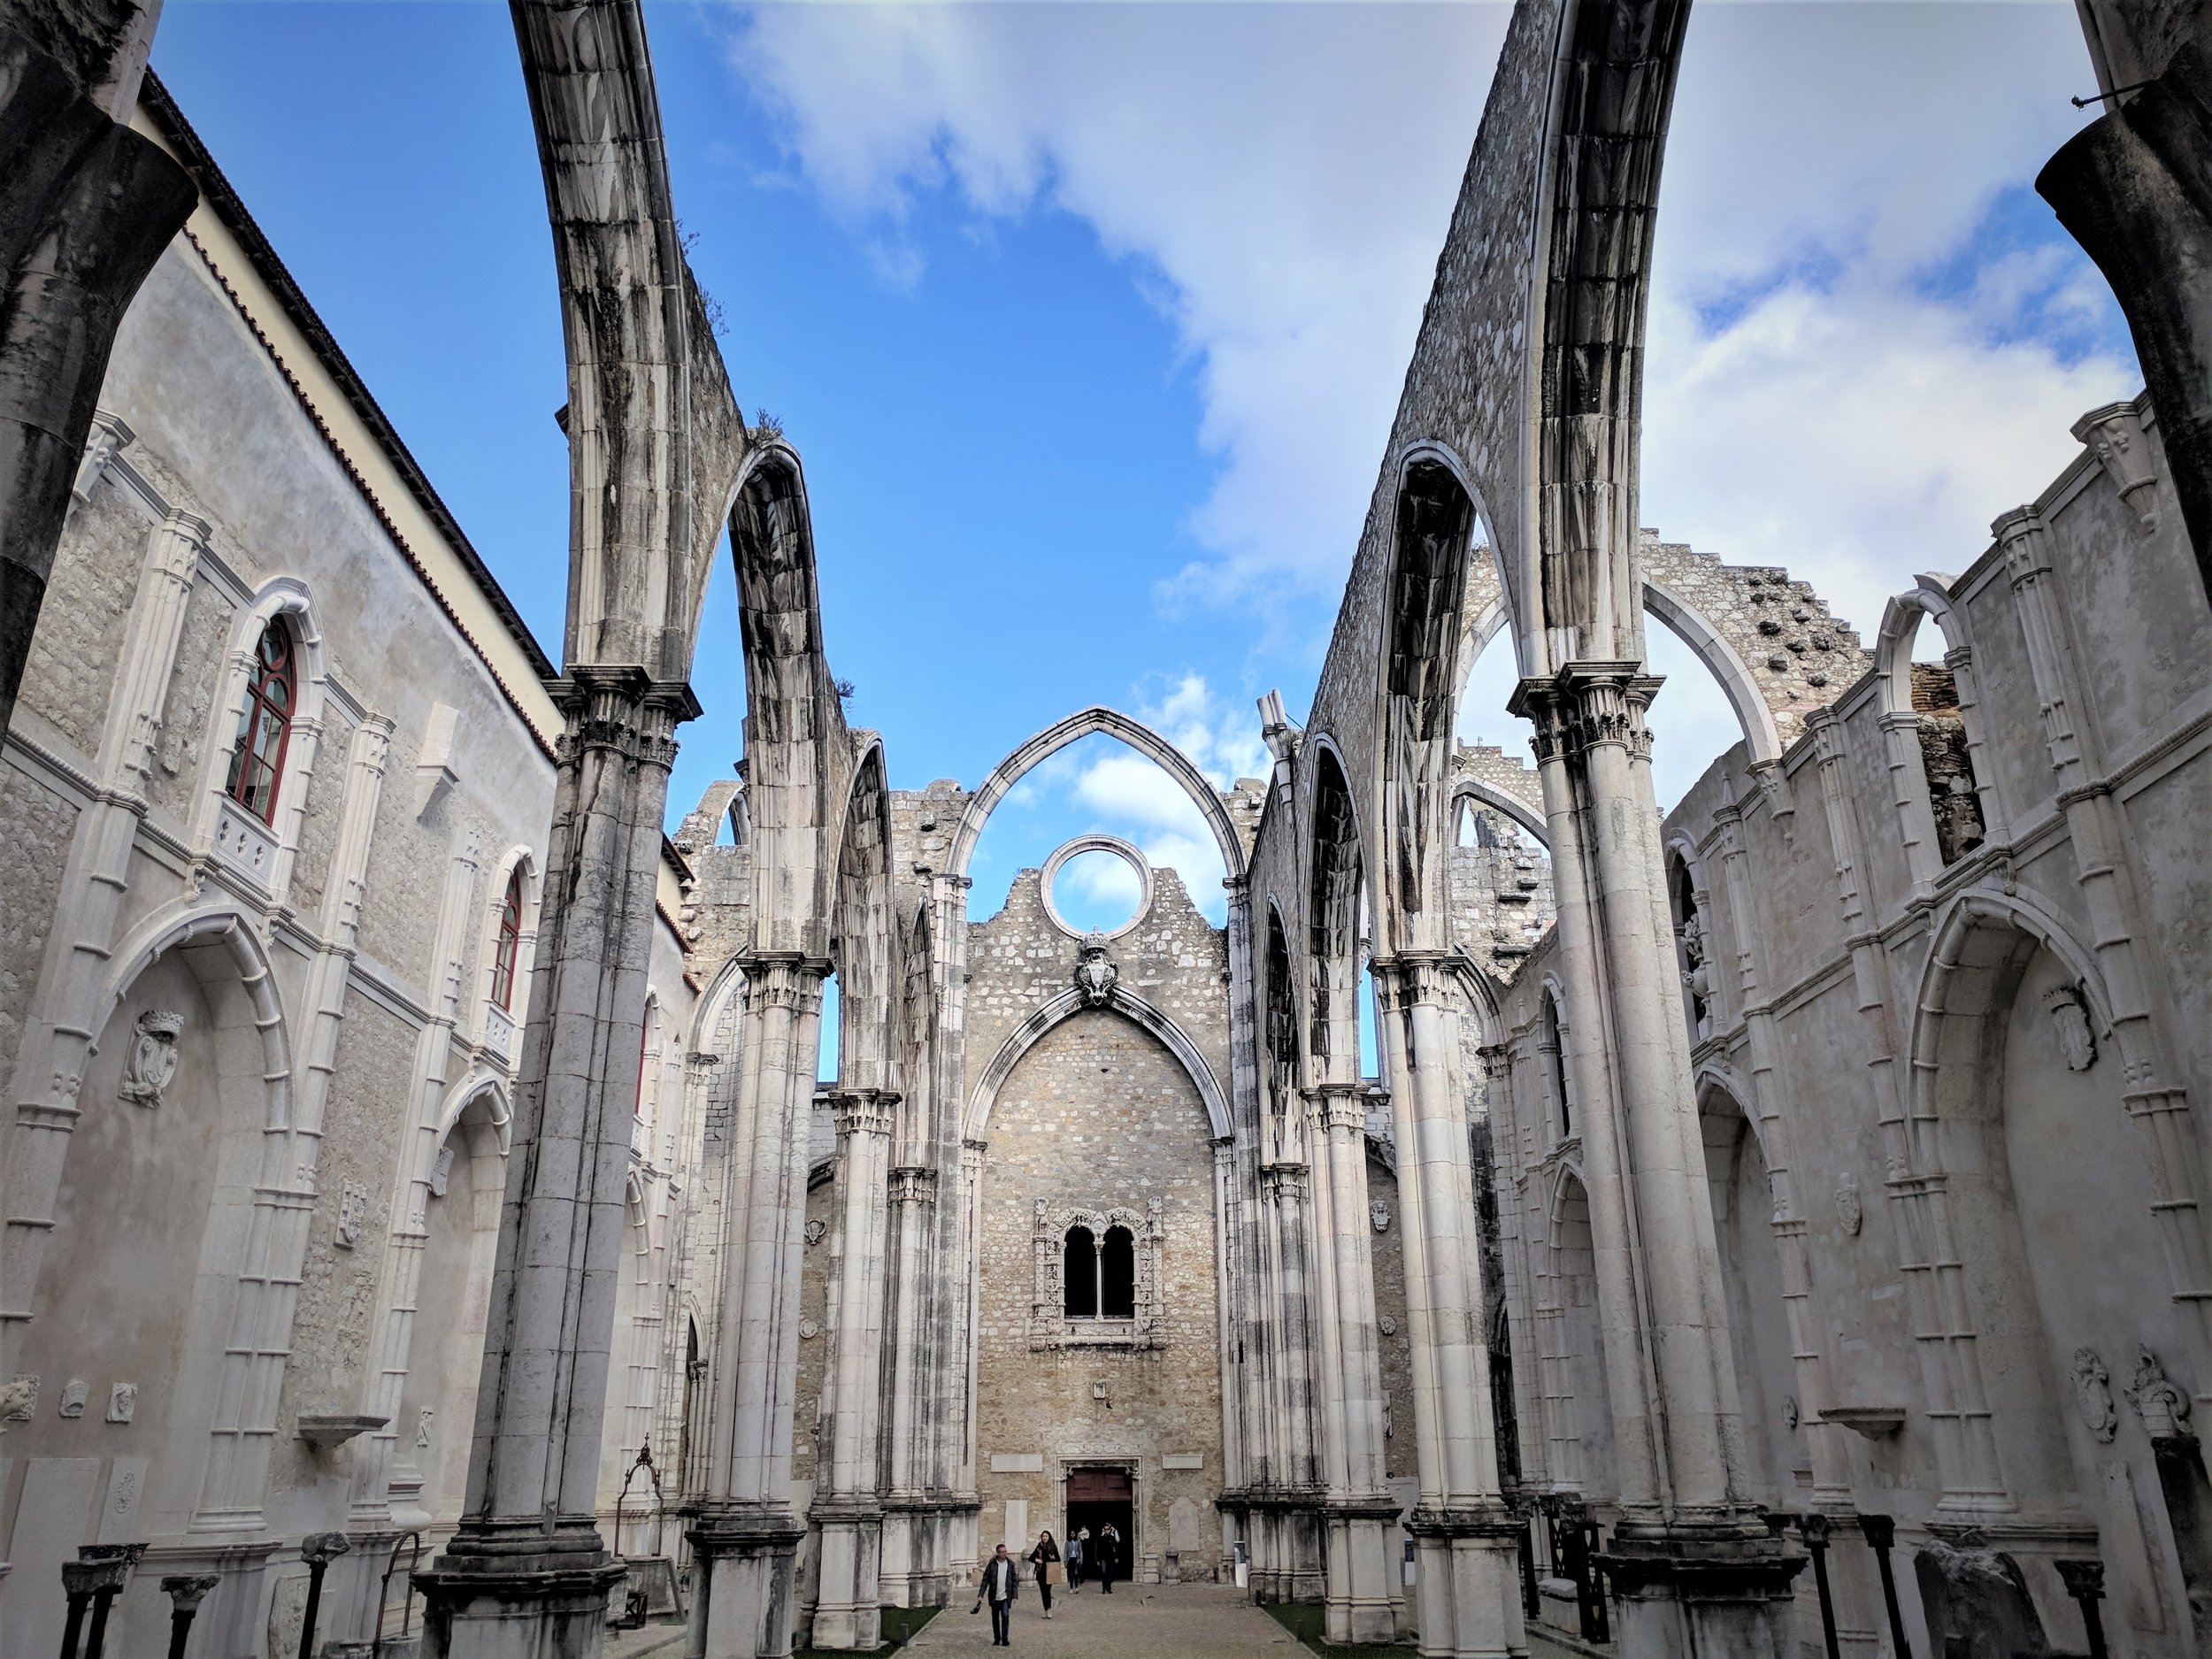 Ruins of the Carmo Convent